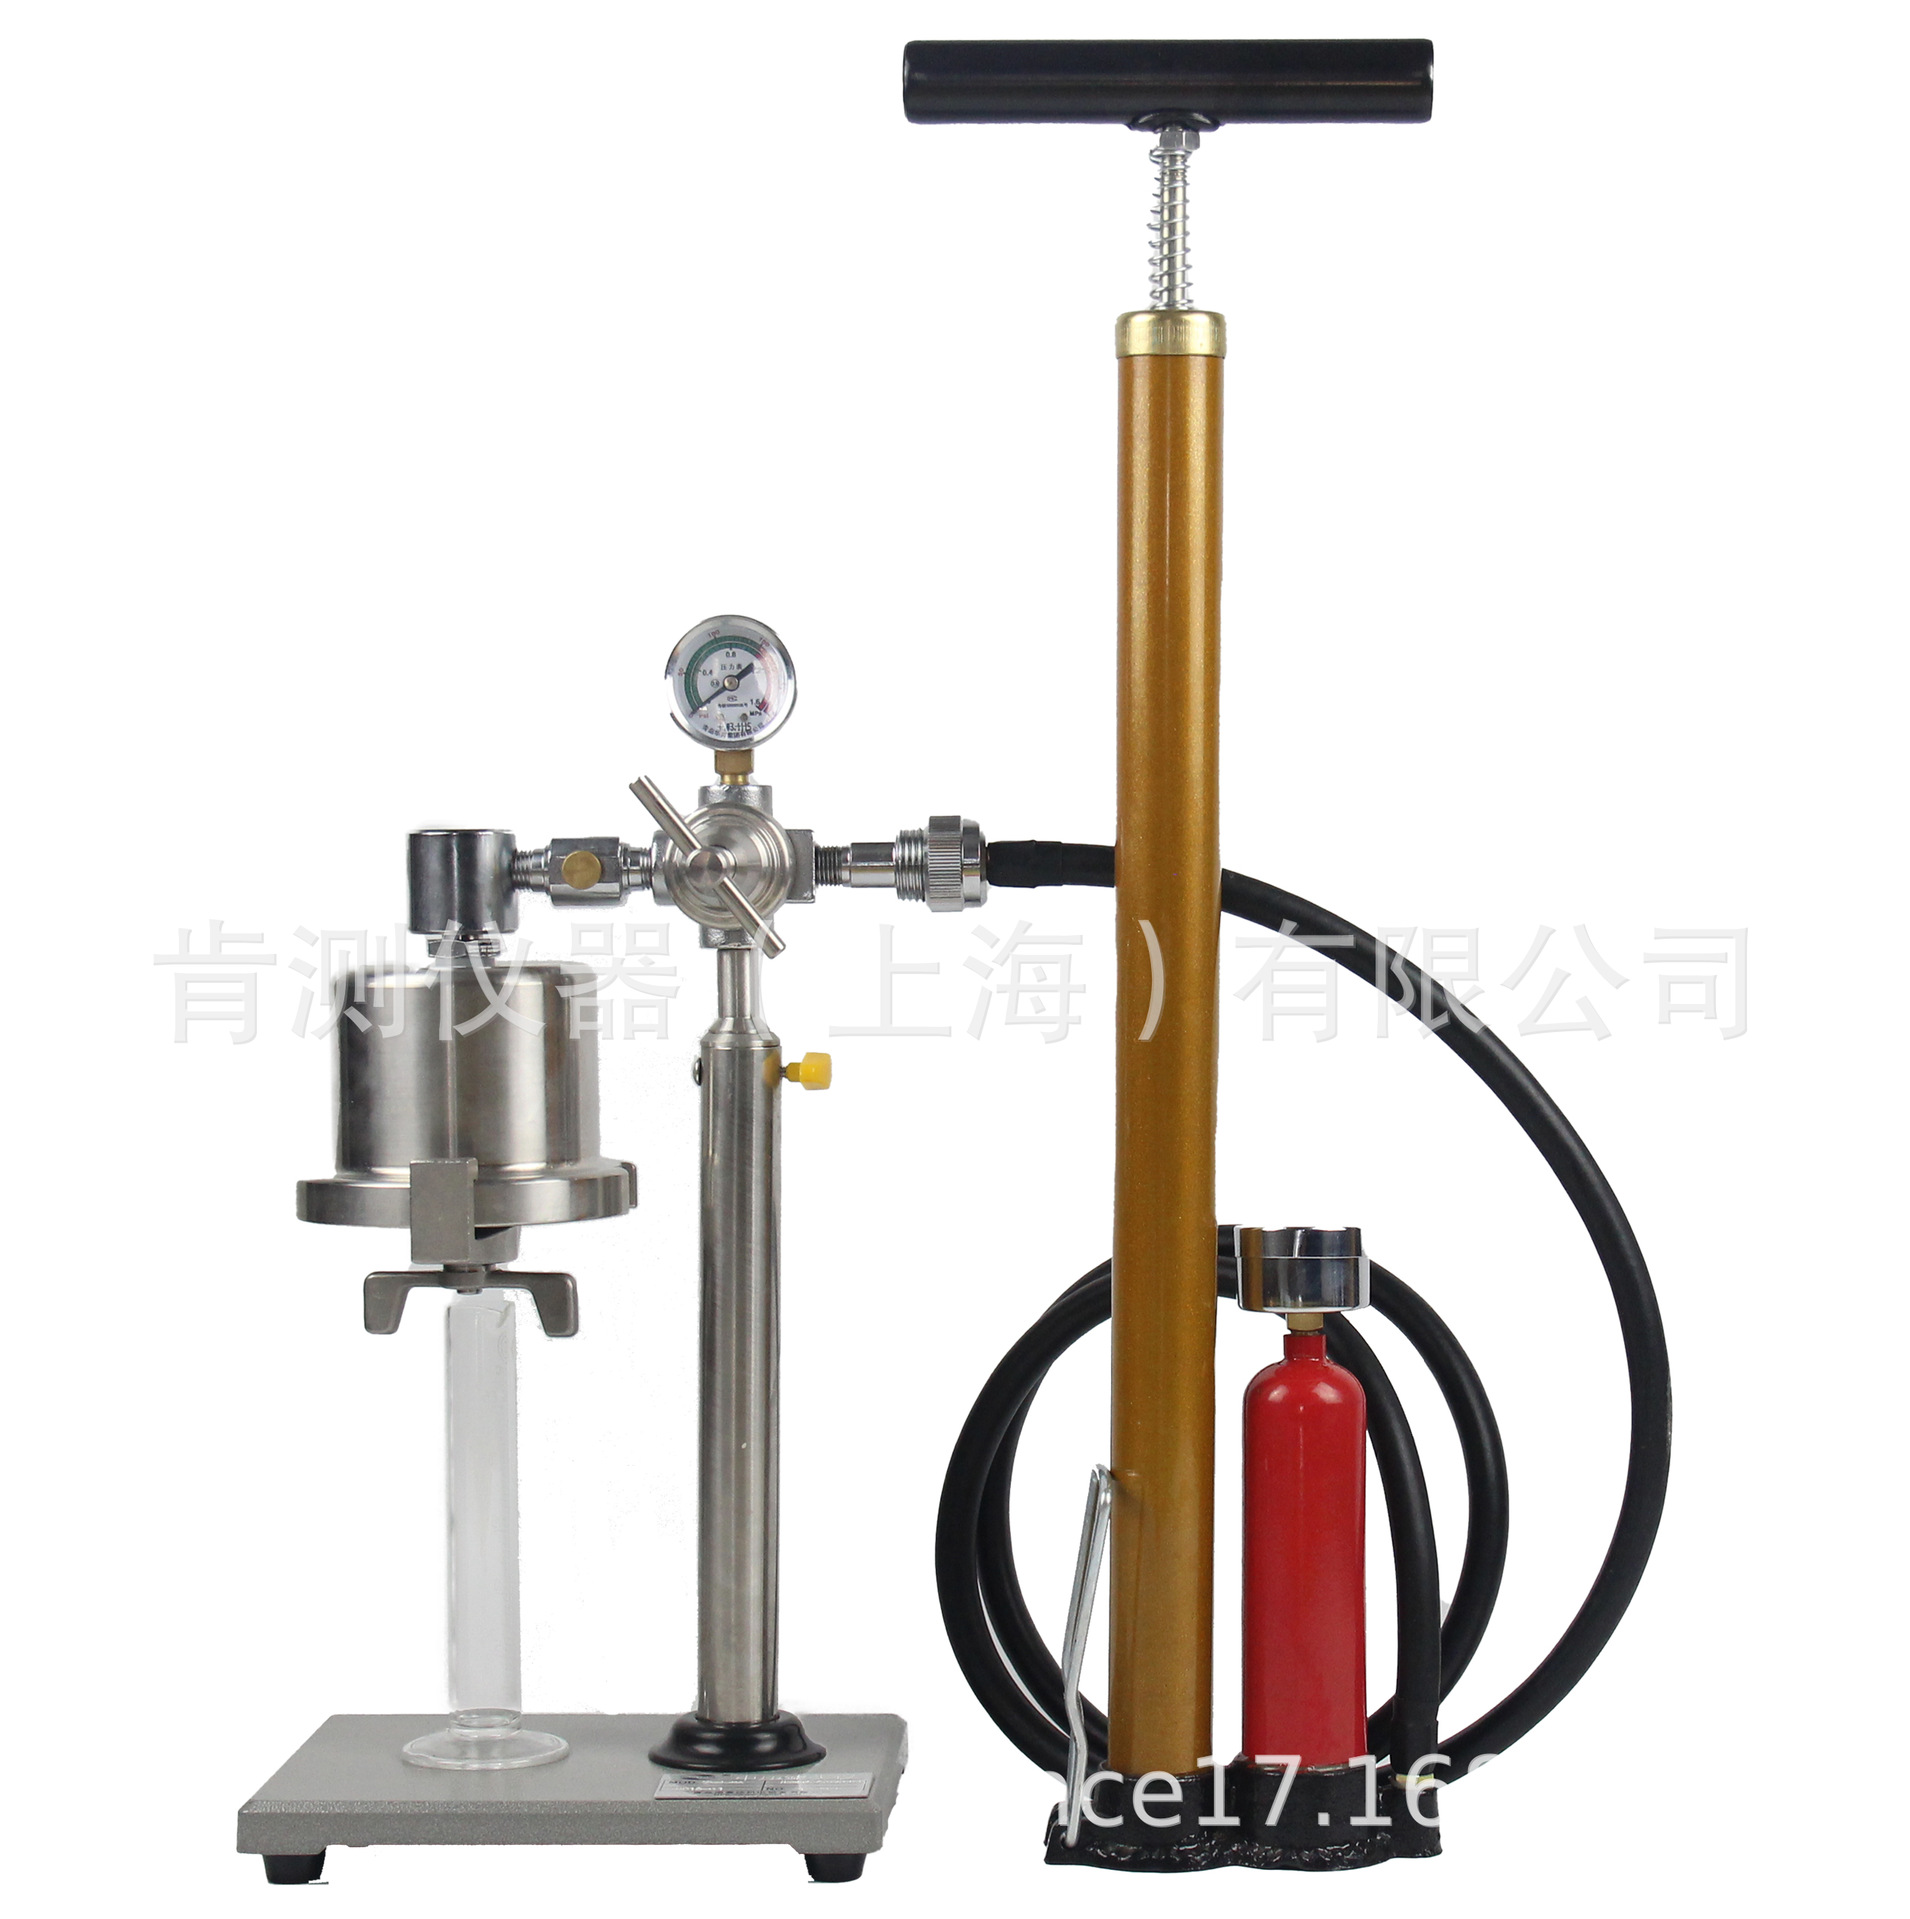 Hypothermia low pressure Filtration DW-2A